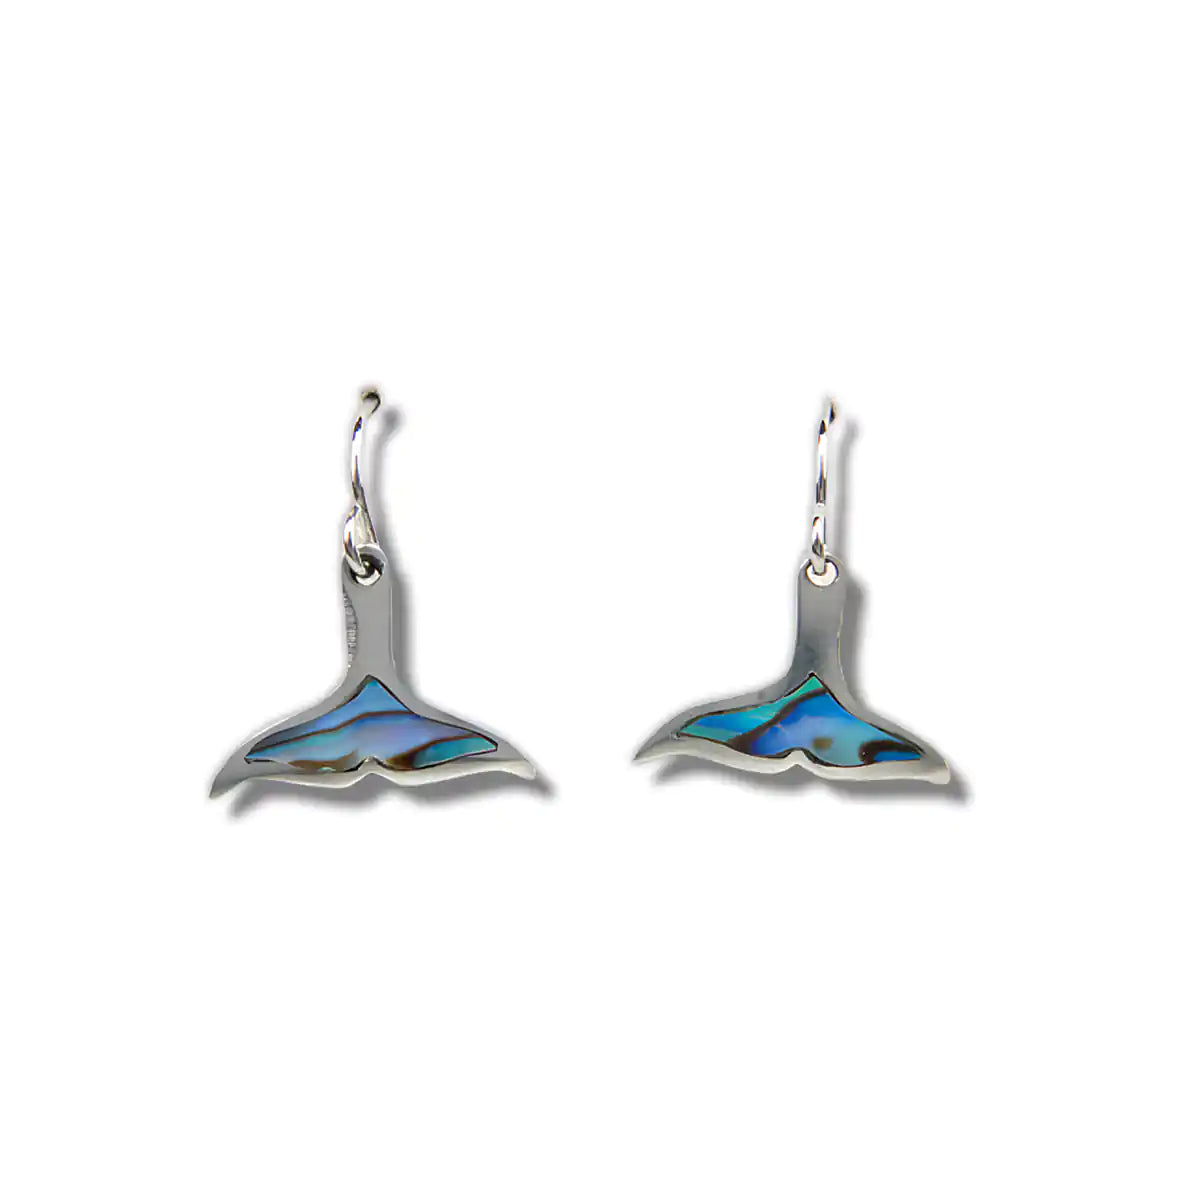 Glacier pearle whale tail earrings